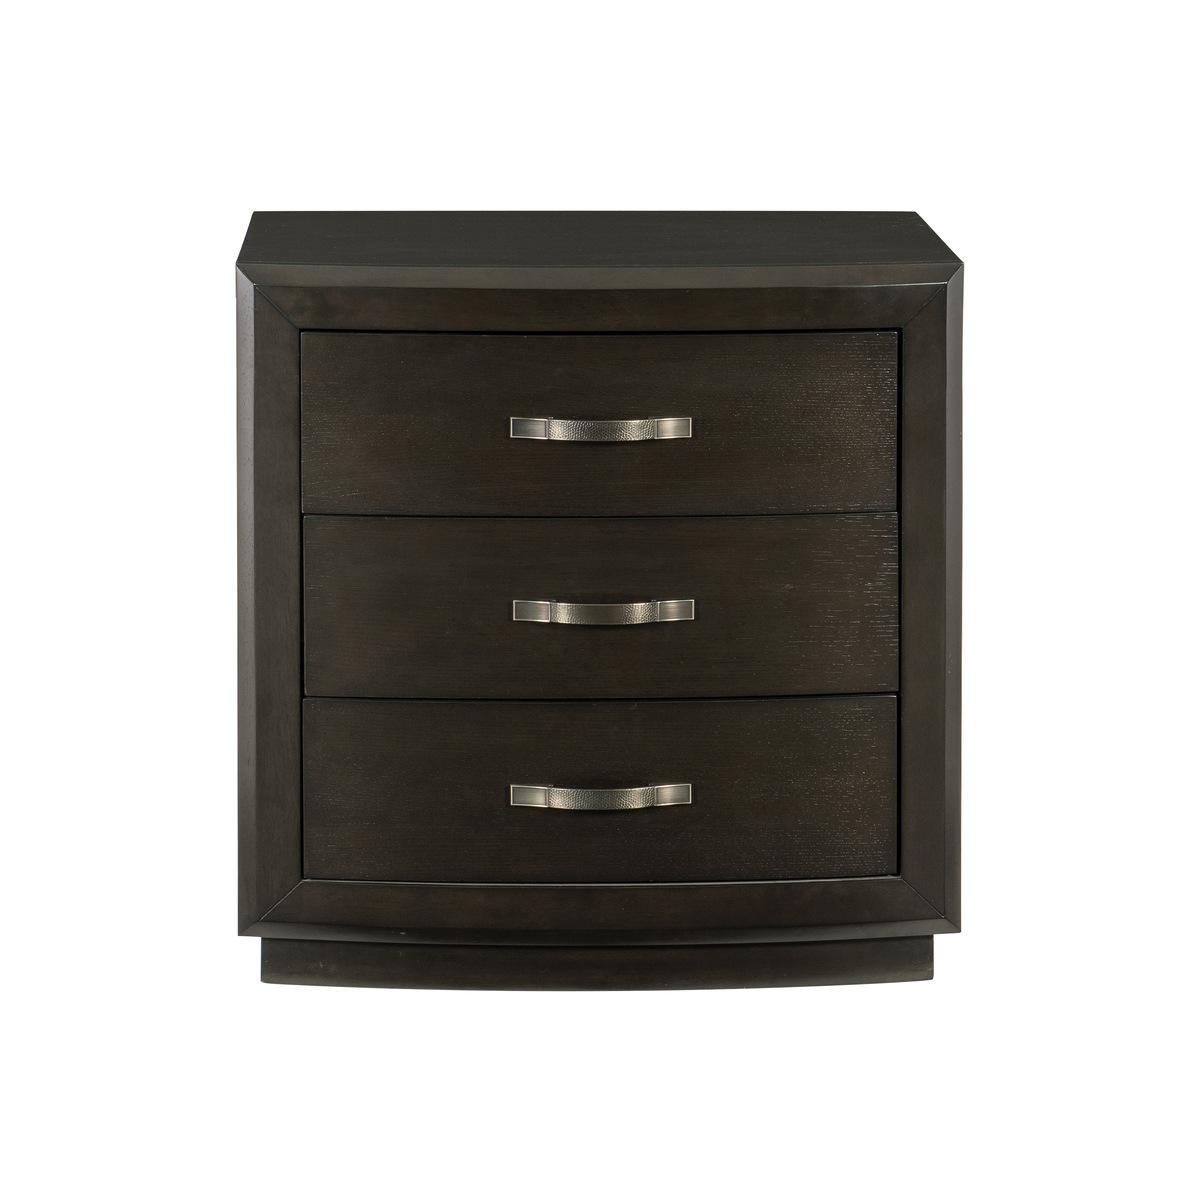 Transitional Nightstand 1575-4 Hodgin 1575-4 in Charcoal 